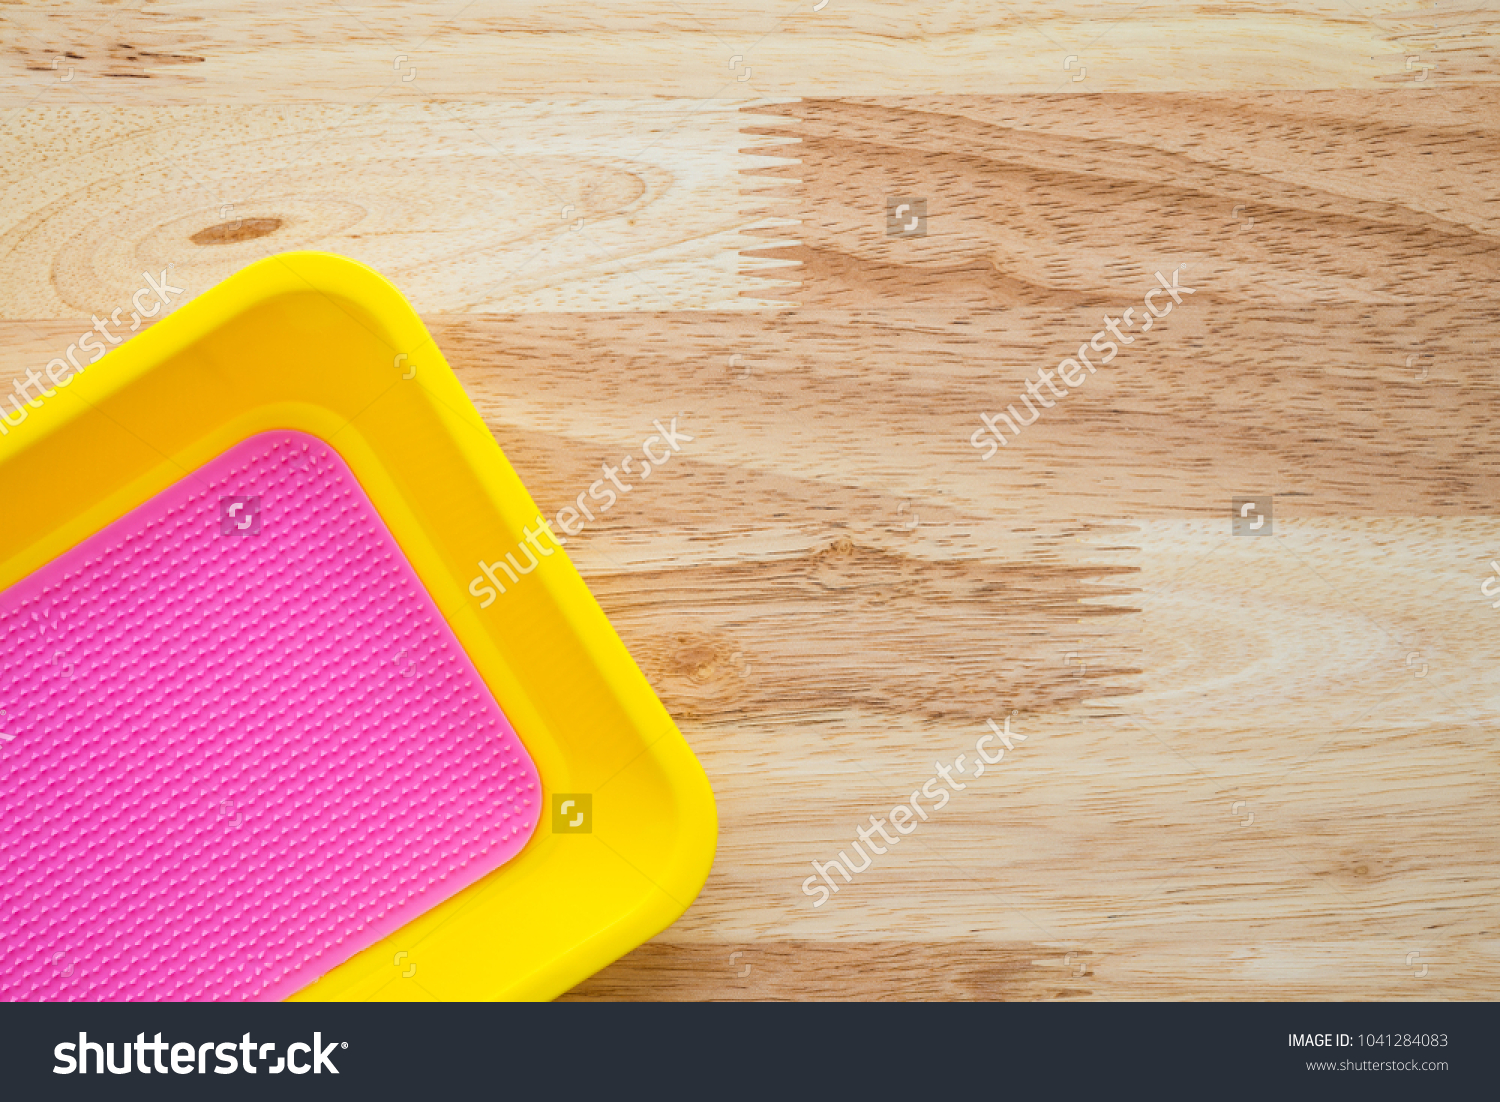 Empty colorful coin tray on wooden table - Small business concept #1041284083